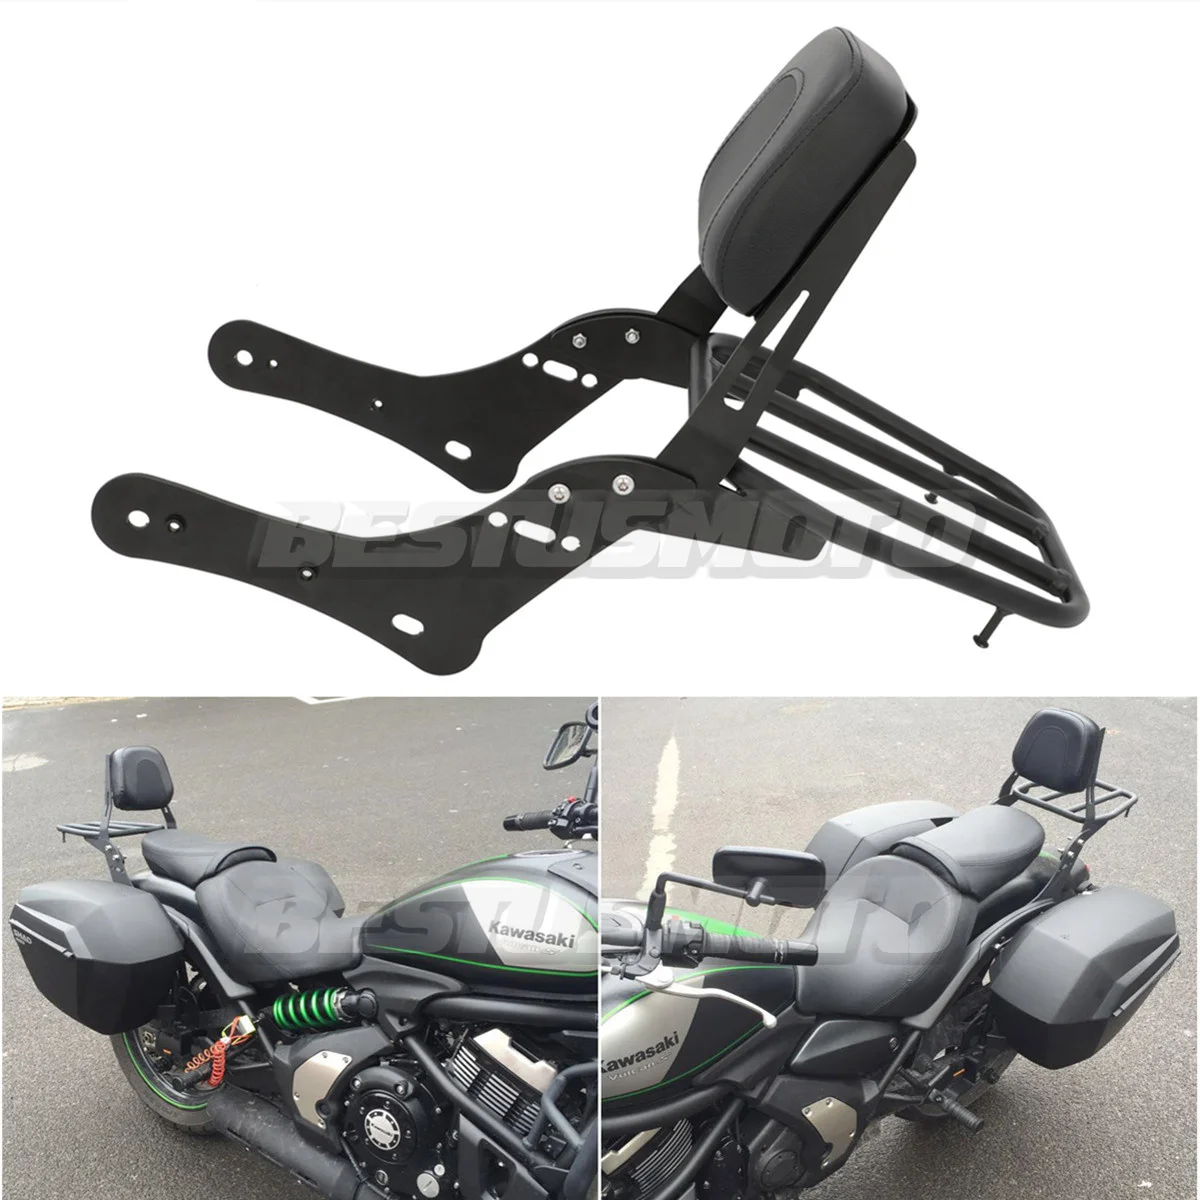 Areyourshop Sissy Bar Backrest with Luggage Rack For Kawasaki Vulcan S 650 VN650 2015-2017 